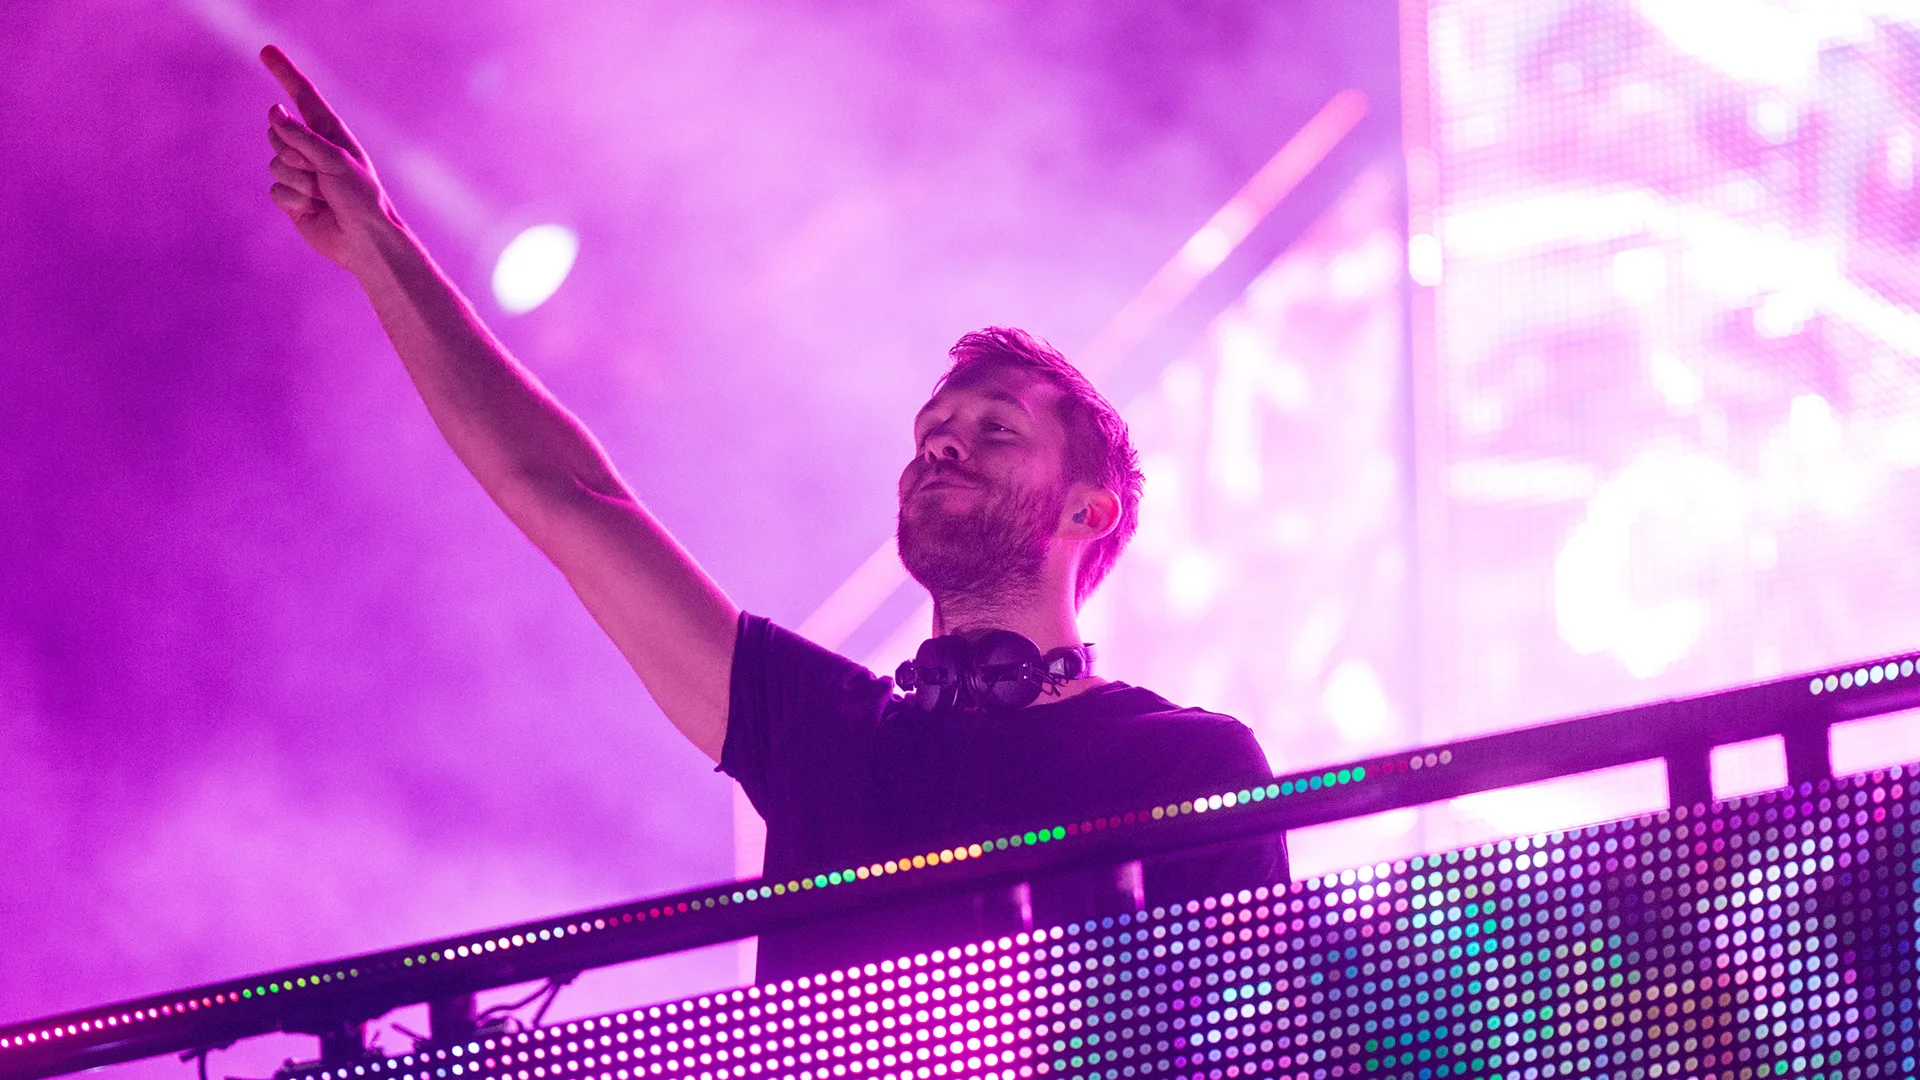 Calvin Harris standing behind DJ booth against a purple background